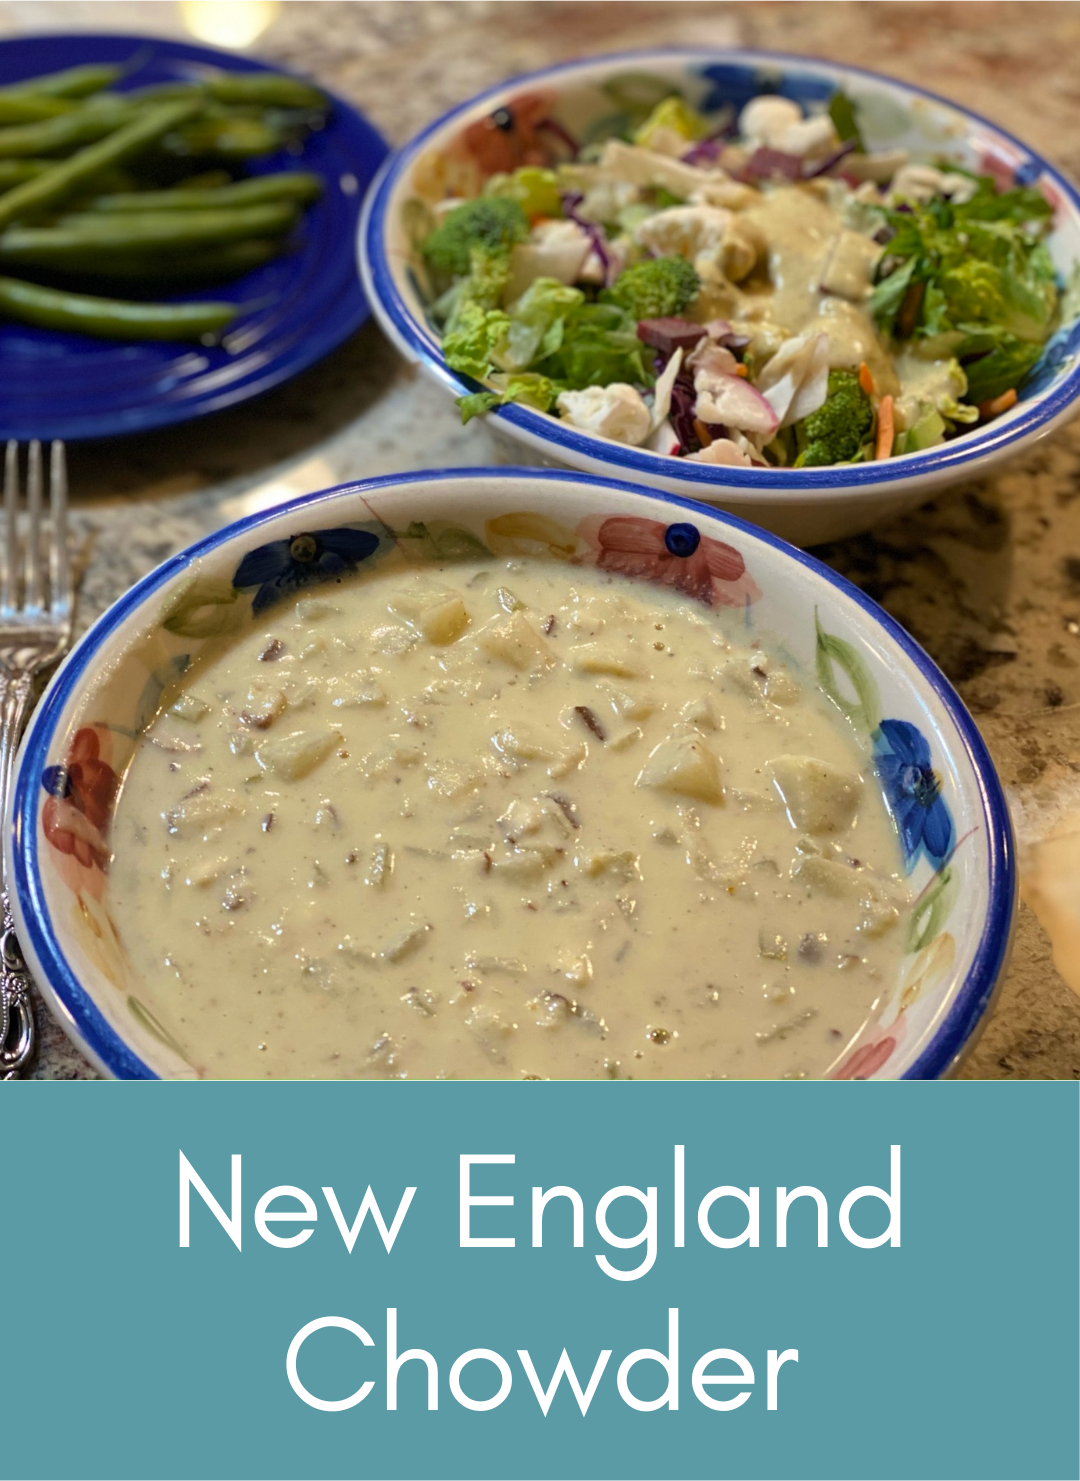 Whole food plant based new England chowder Picture with link to recipe